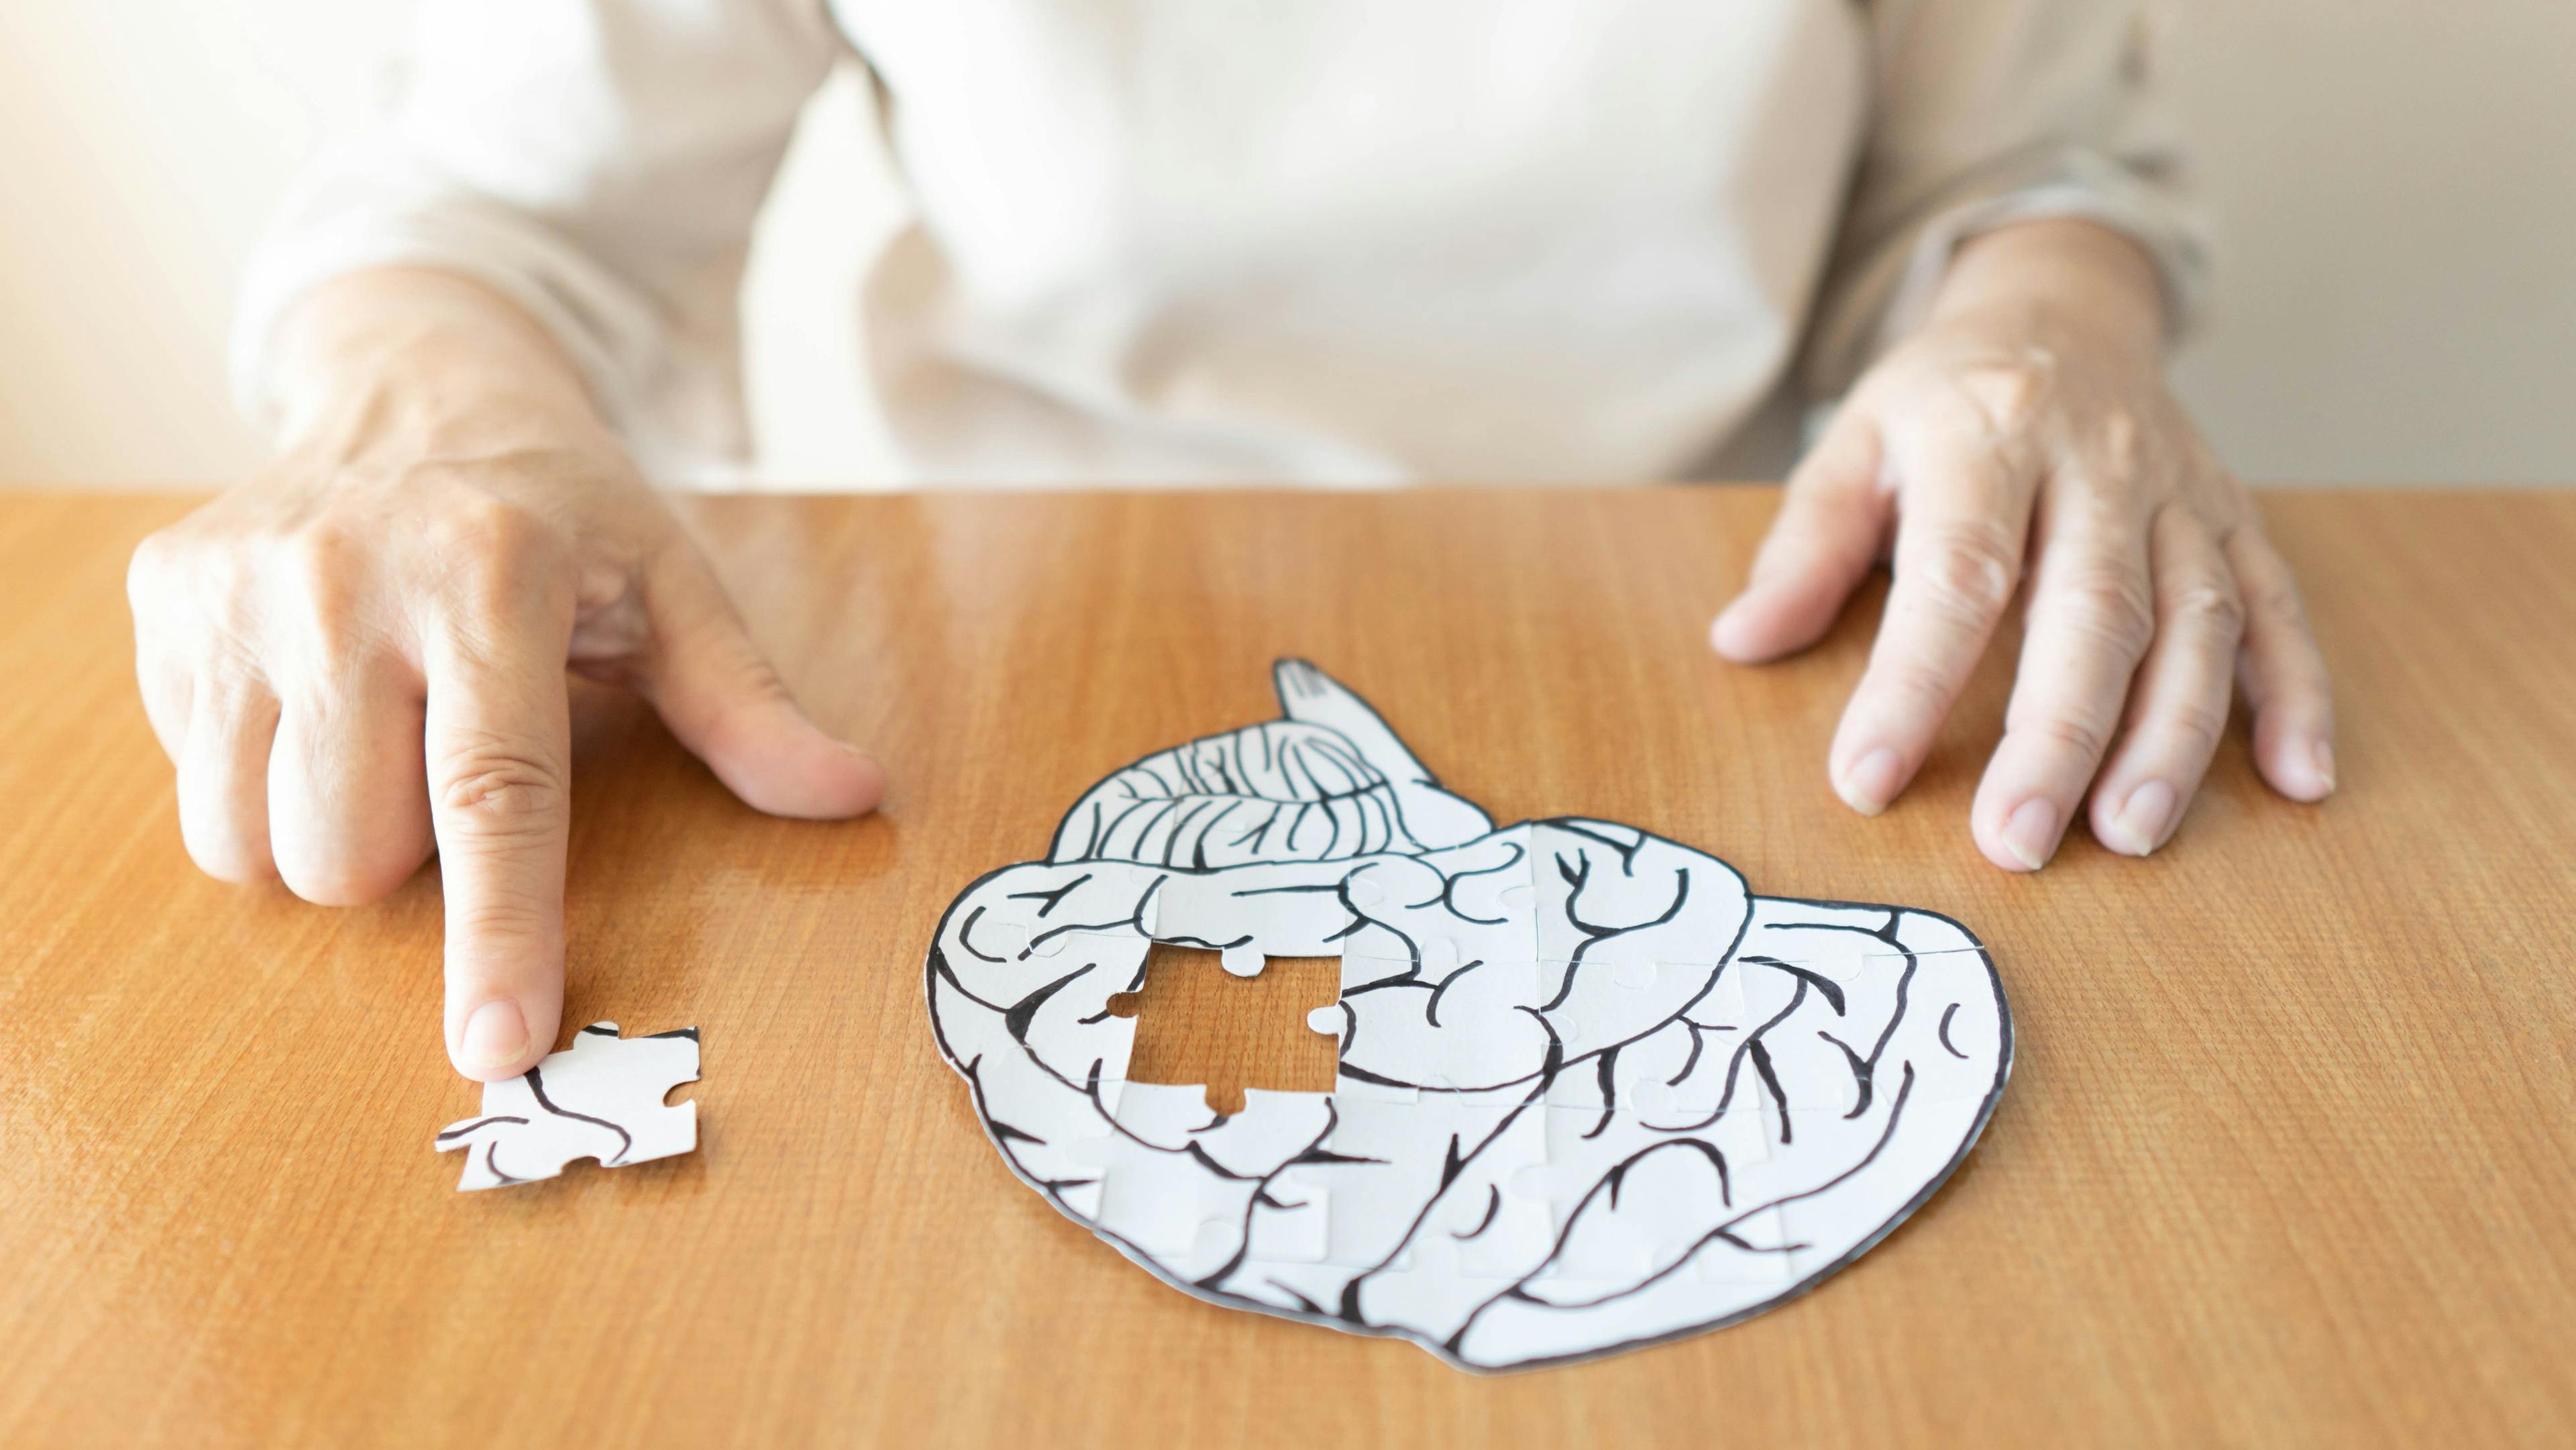 Certain Cardiovascular Conditions, Risks May be Worse for Cognition in Middle-aged Women